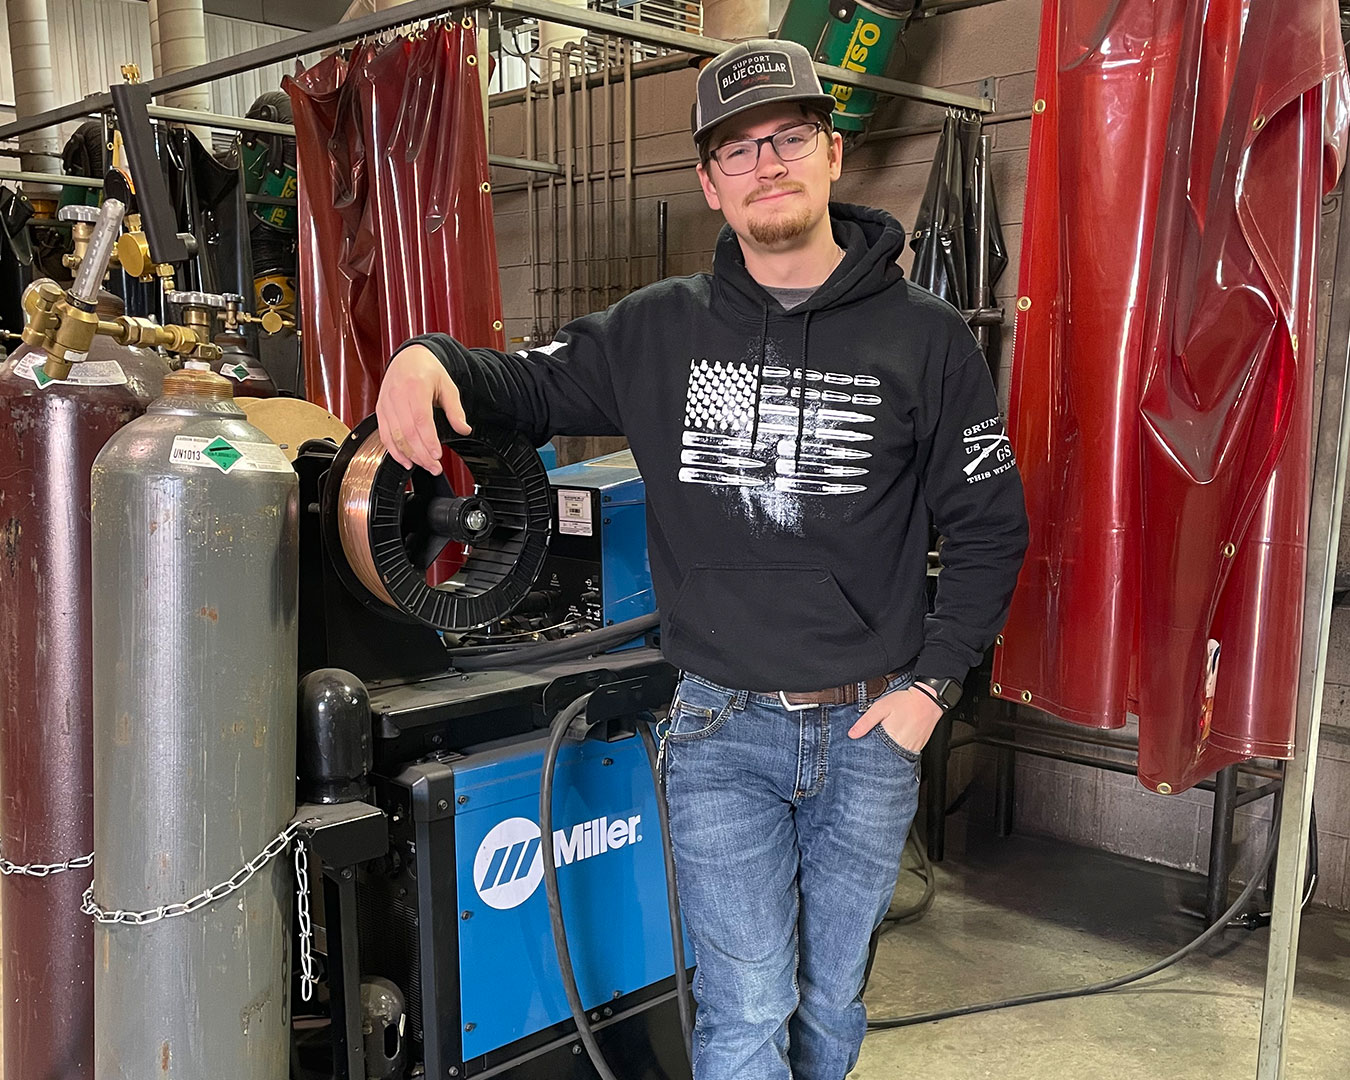 Student poses in front of welding station